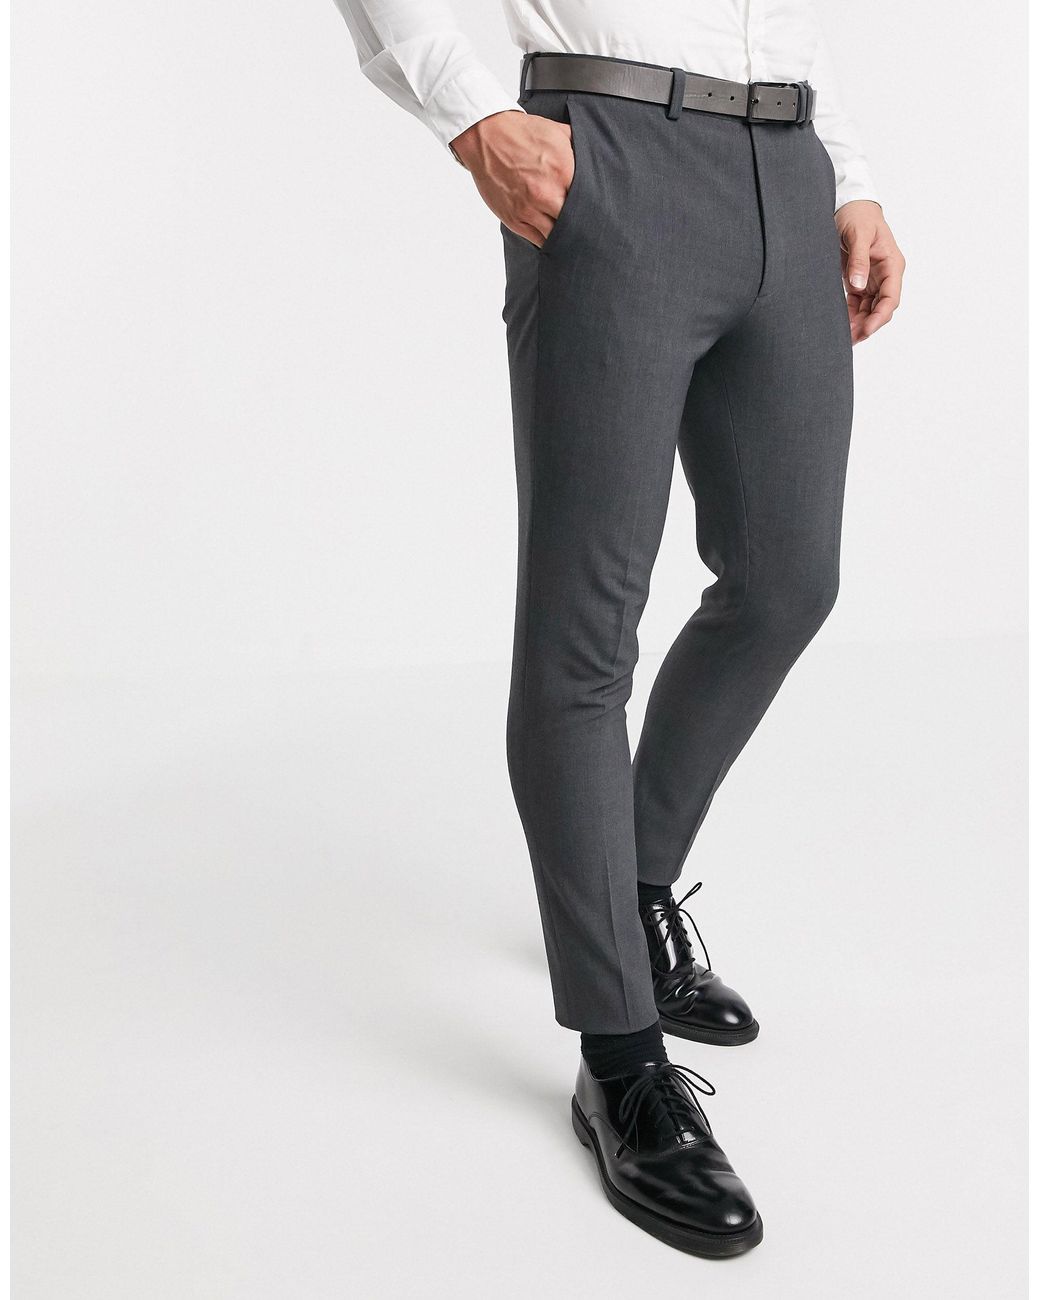 ASOS Synthetic Super Skinny Suit Pants in Gray for Men - Lyst